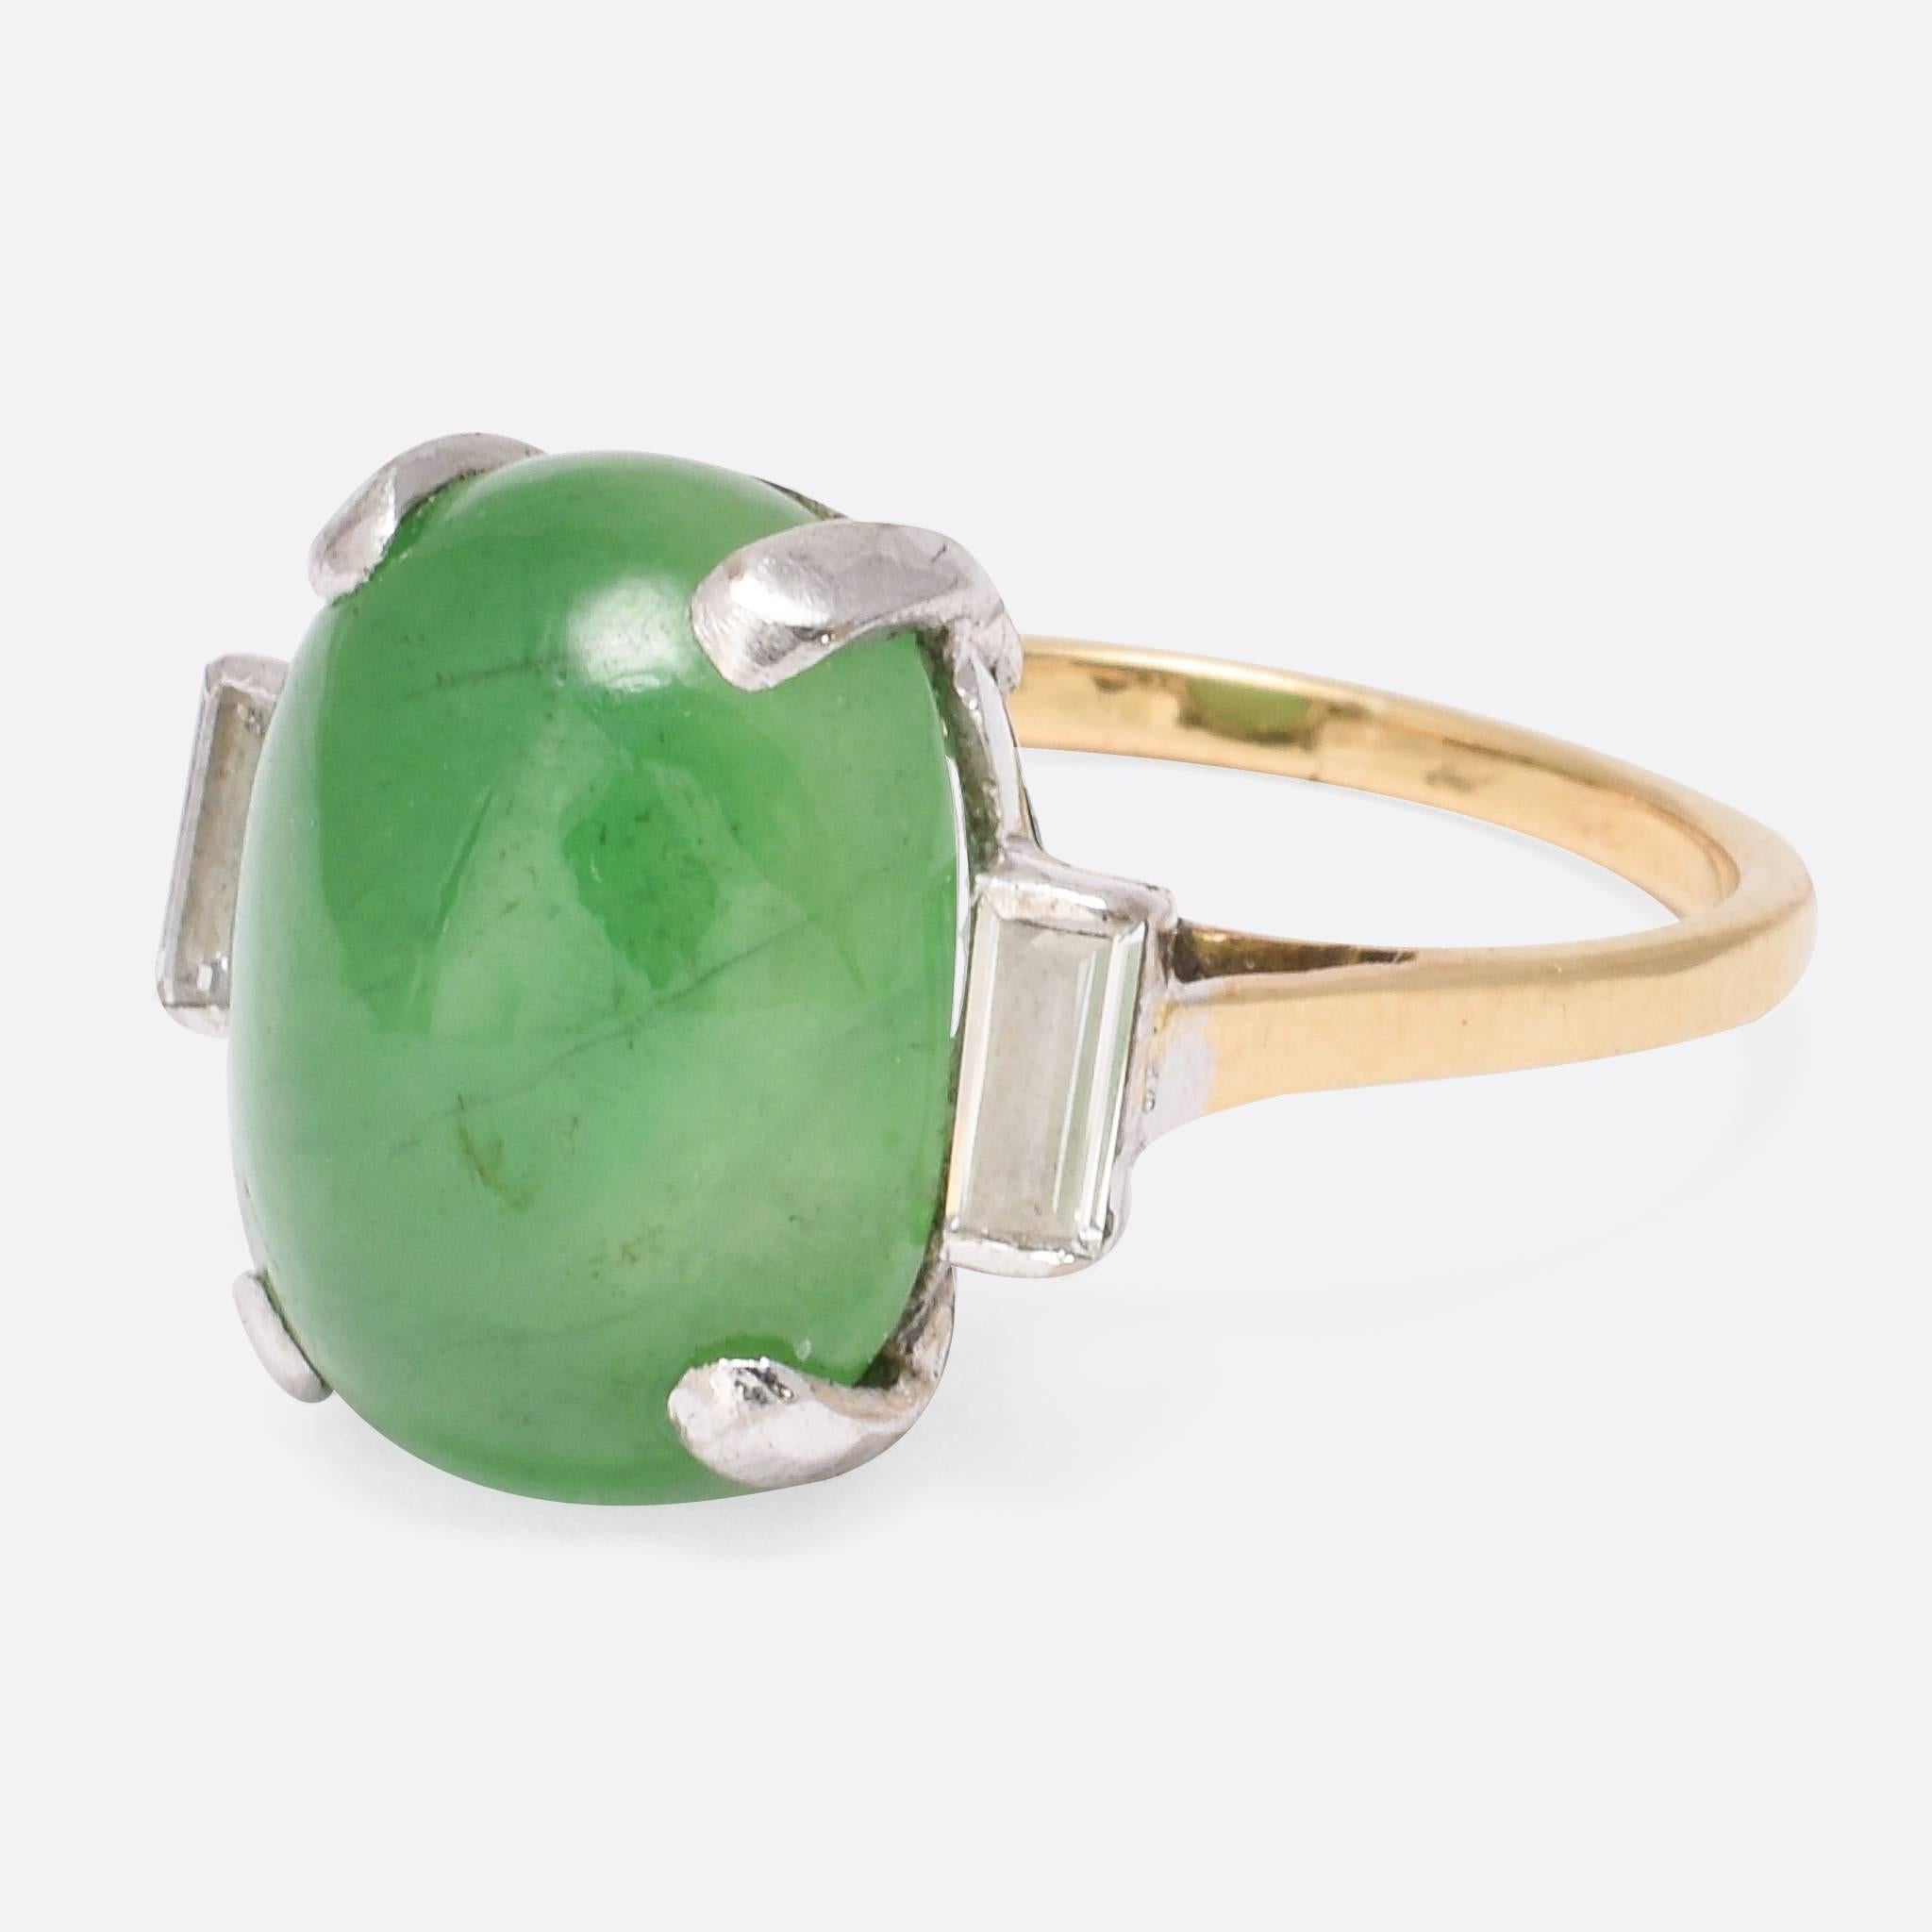 A stylish Art Deco three-stone ring, set with a superb jadeite cabochon flanked by two perfect baguette cut diamonds. The jade is of excellent colour - a vibrant apple green - and set in an oversized four-claw mount. Ring size: 6.75, Jade: 14.2 x